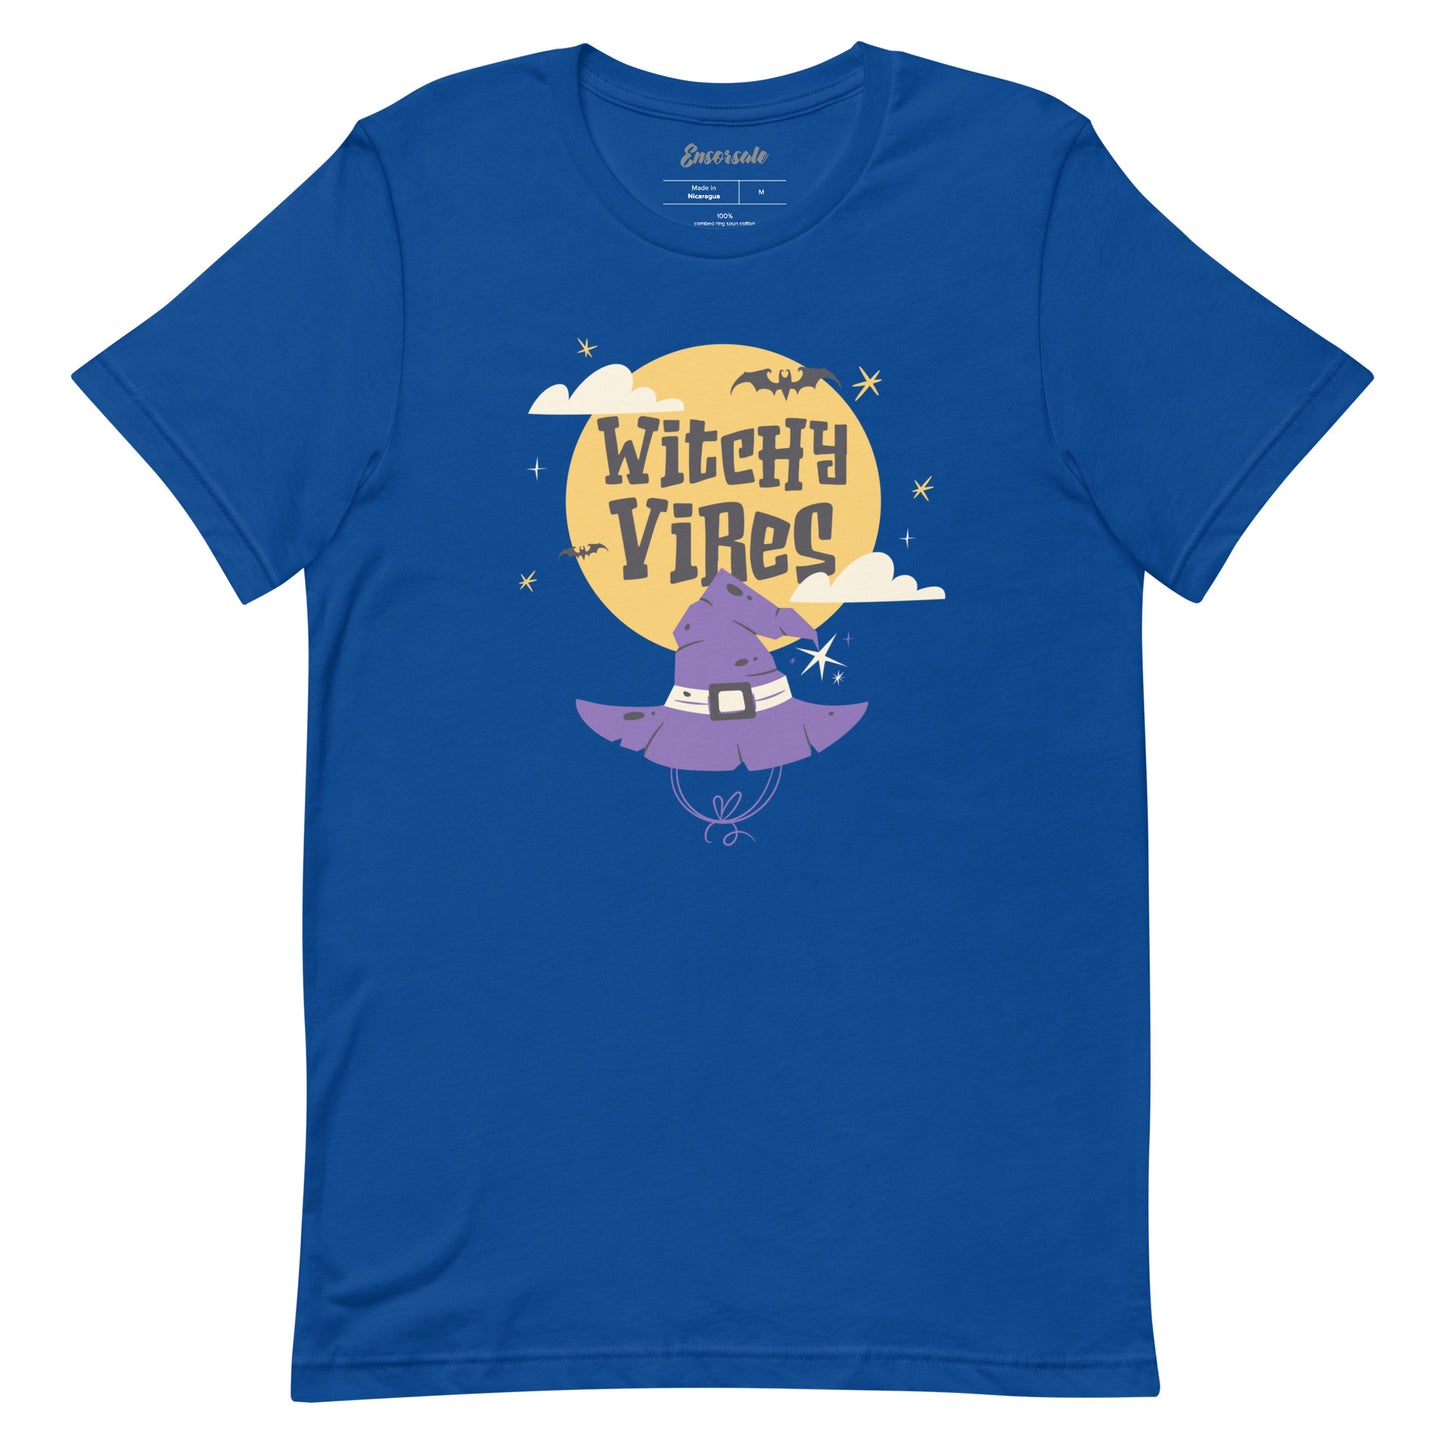 Witchy Vibes t-shirt